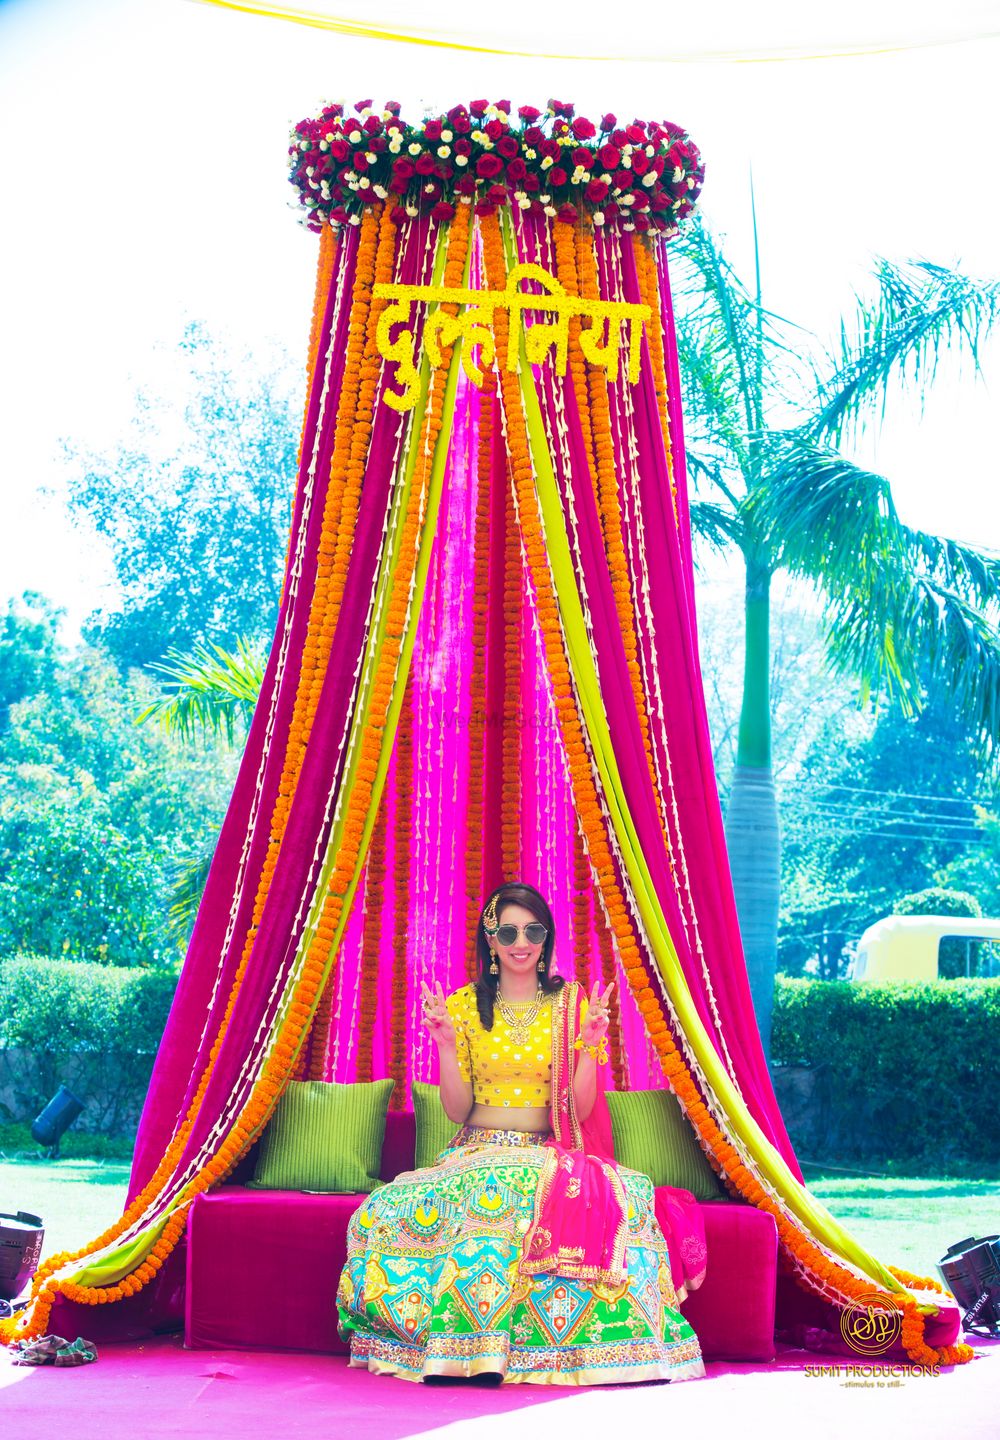 Photo of Mehendi decor idea with bright pink and yellow theme and bridal seat